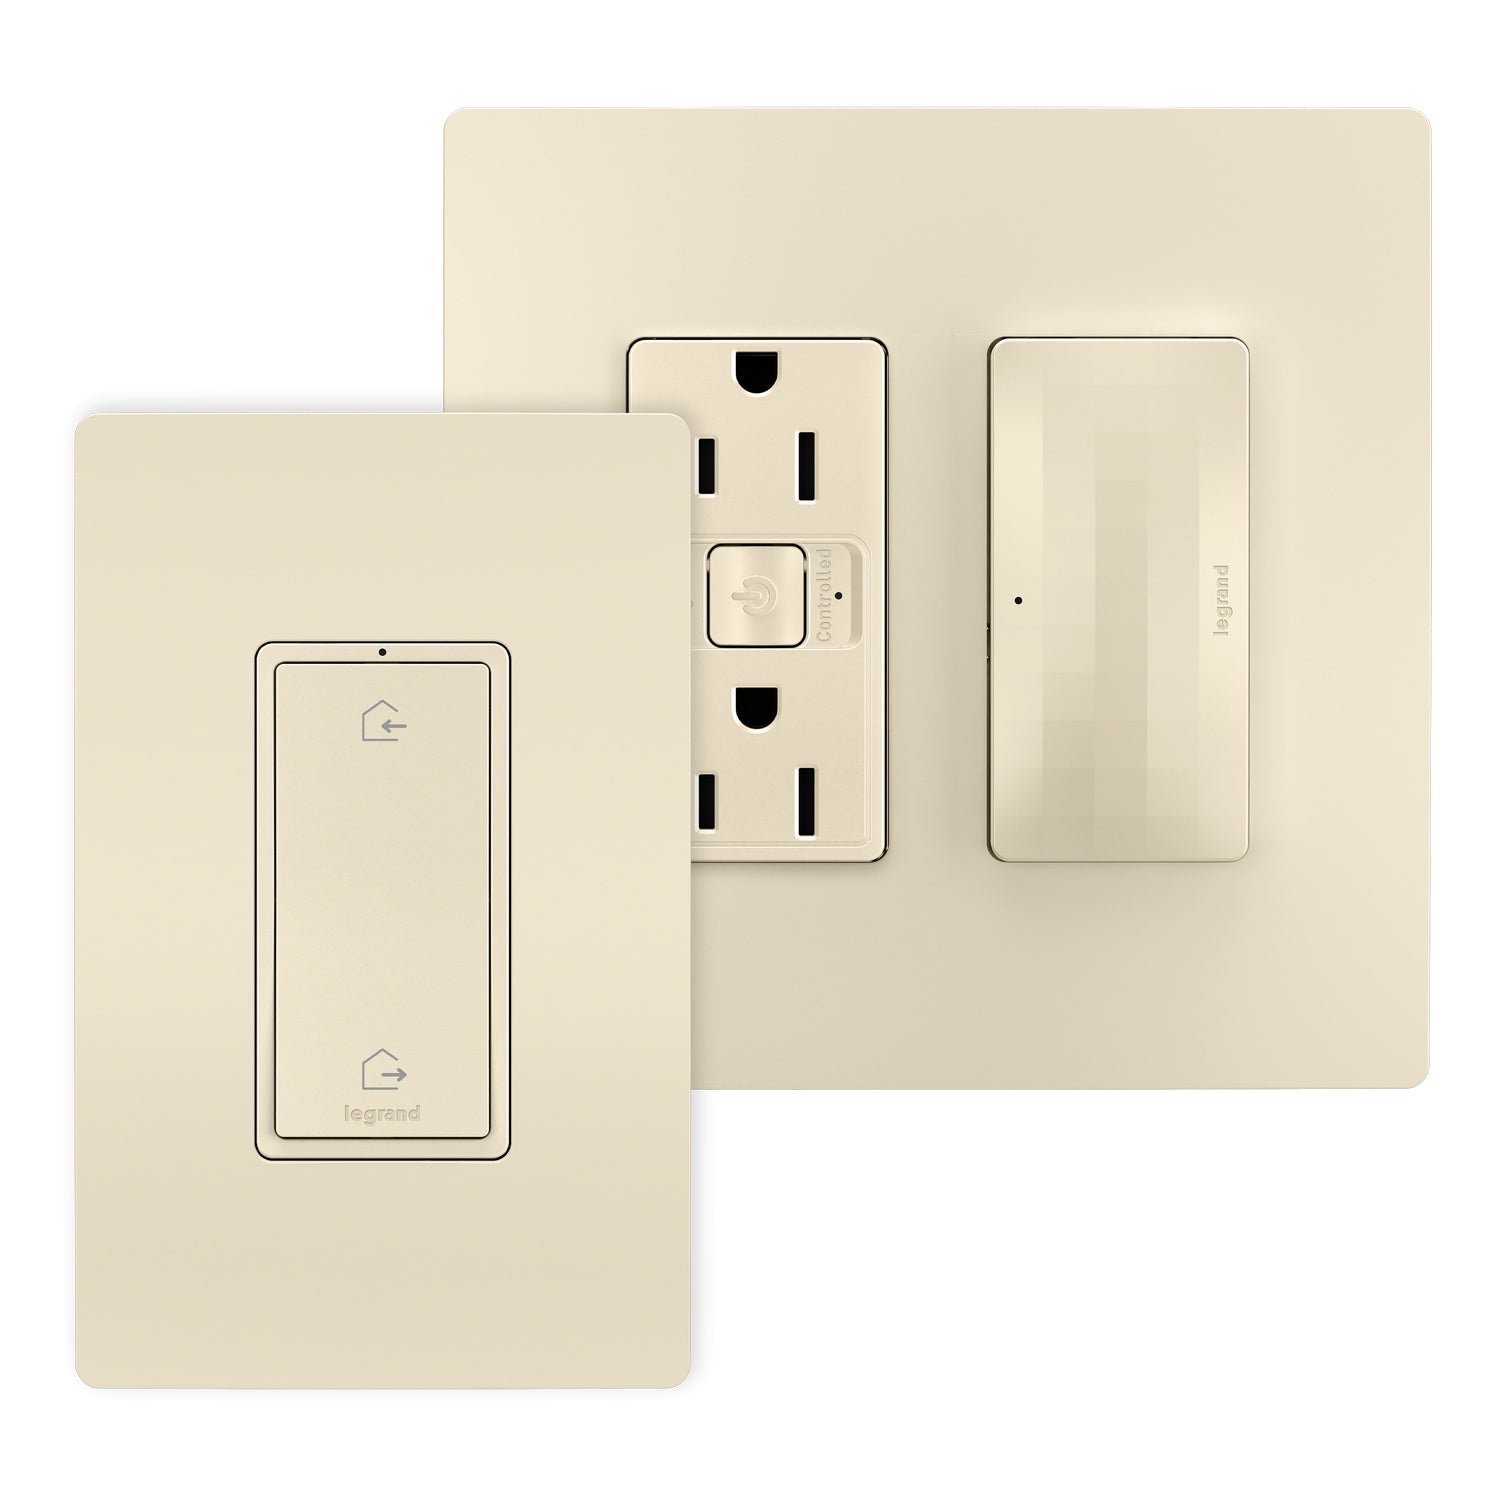 Legrand Canada - WNRH15KITLA - Outlet Kit With H/A Switch - Light Almond